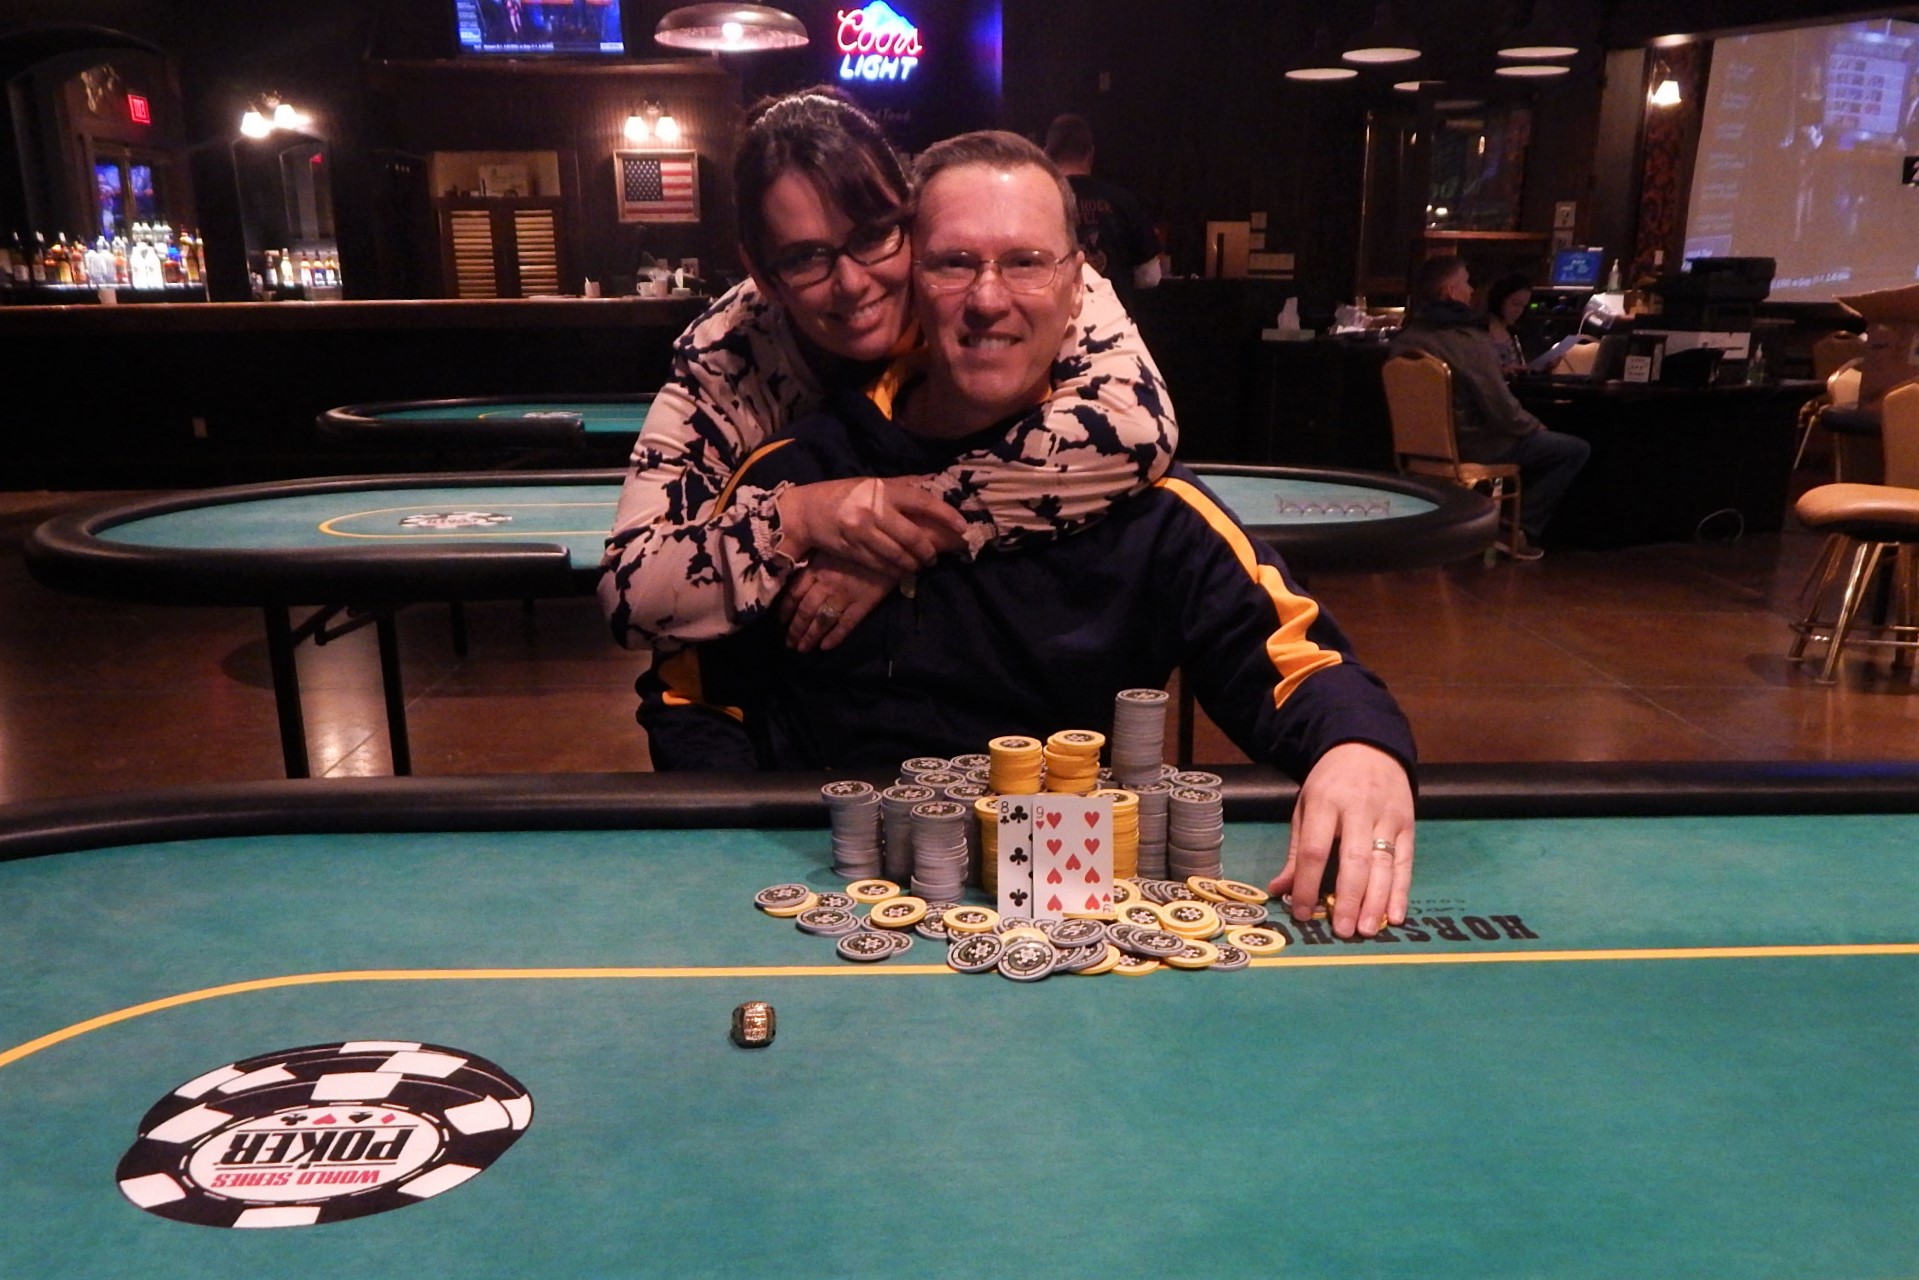 David Davenport’s WSOPC Caesars Horseshoe Council Bluffs Main Event Win Brings First Ring and $97K, Newbies and Oldtimers Reign Overall